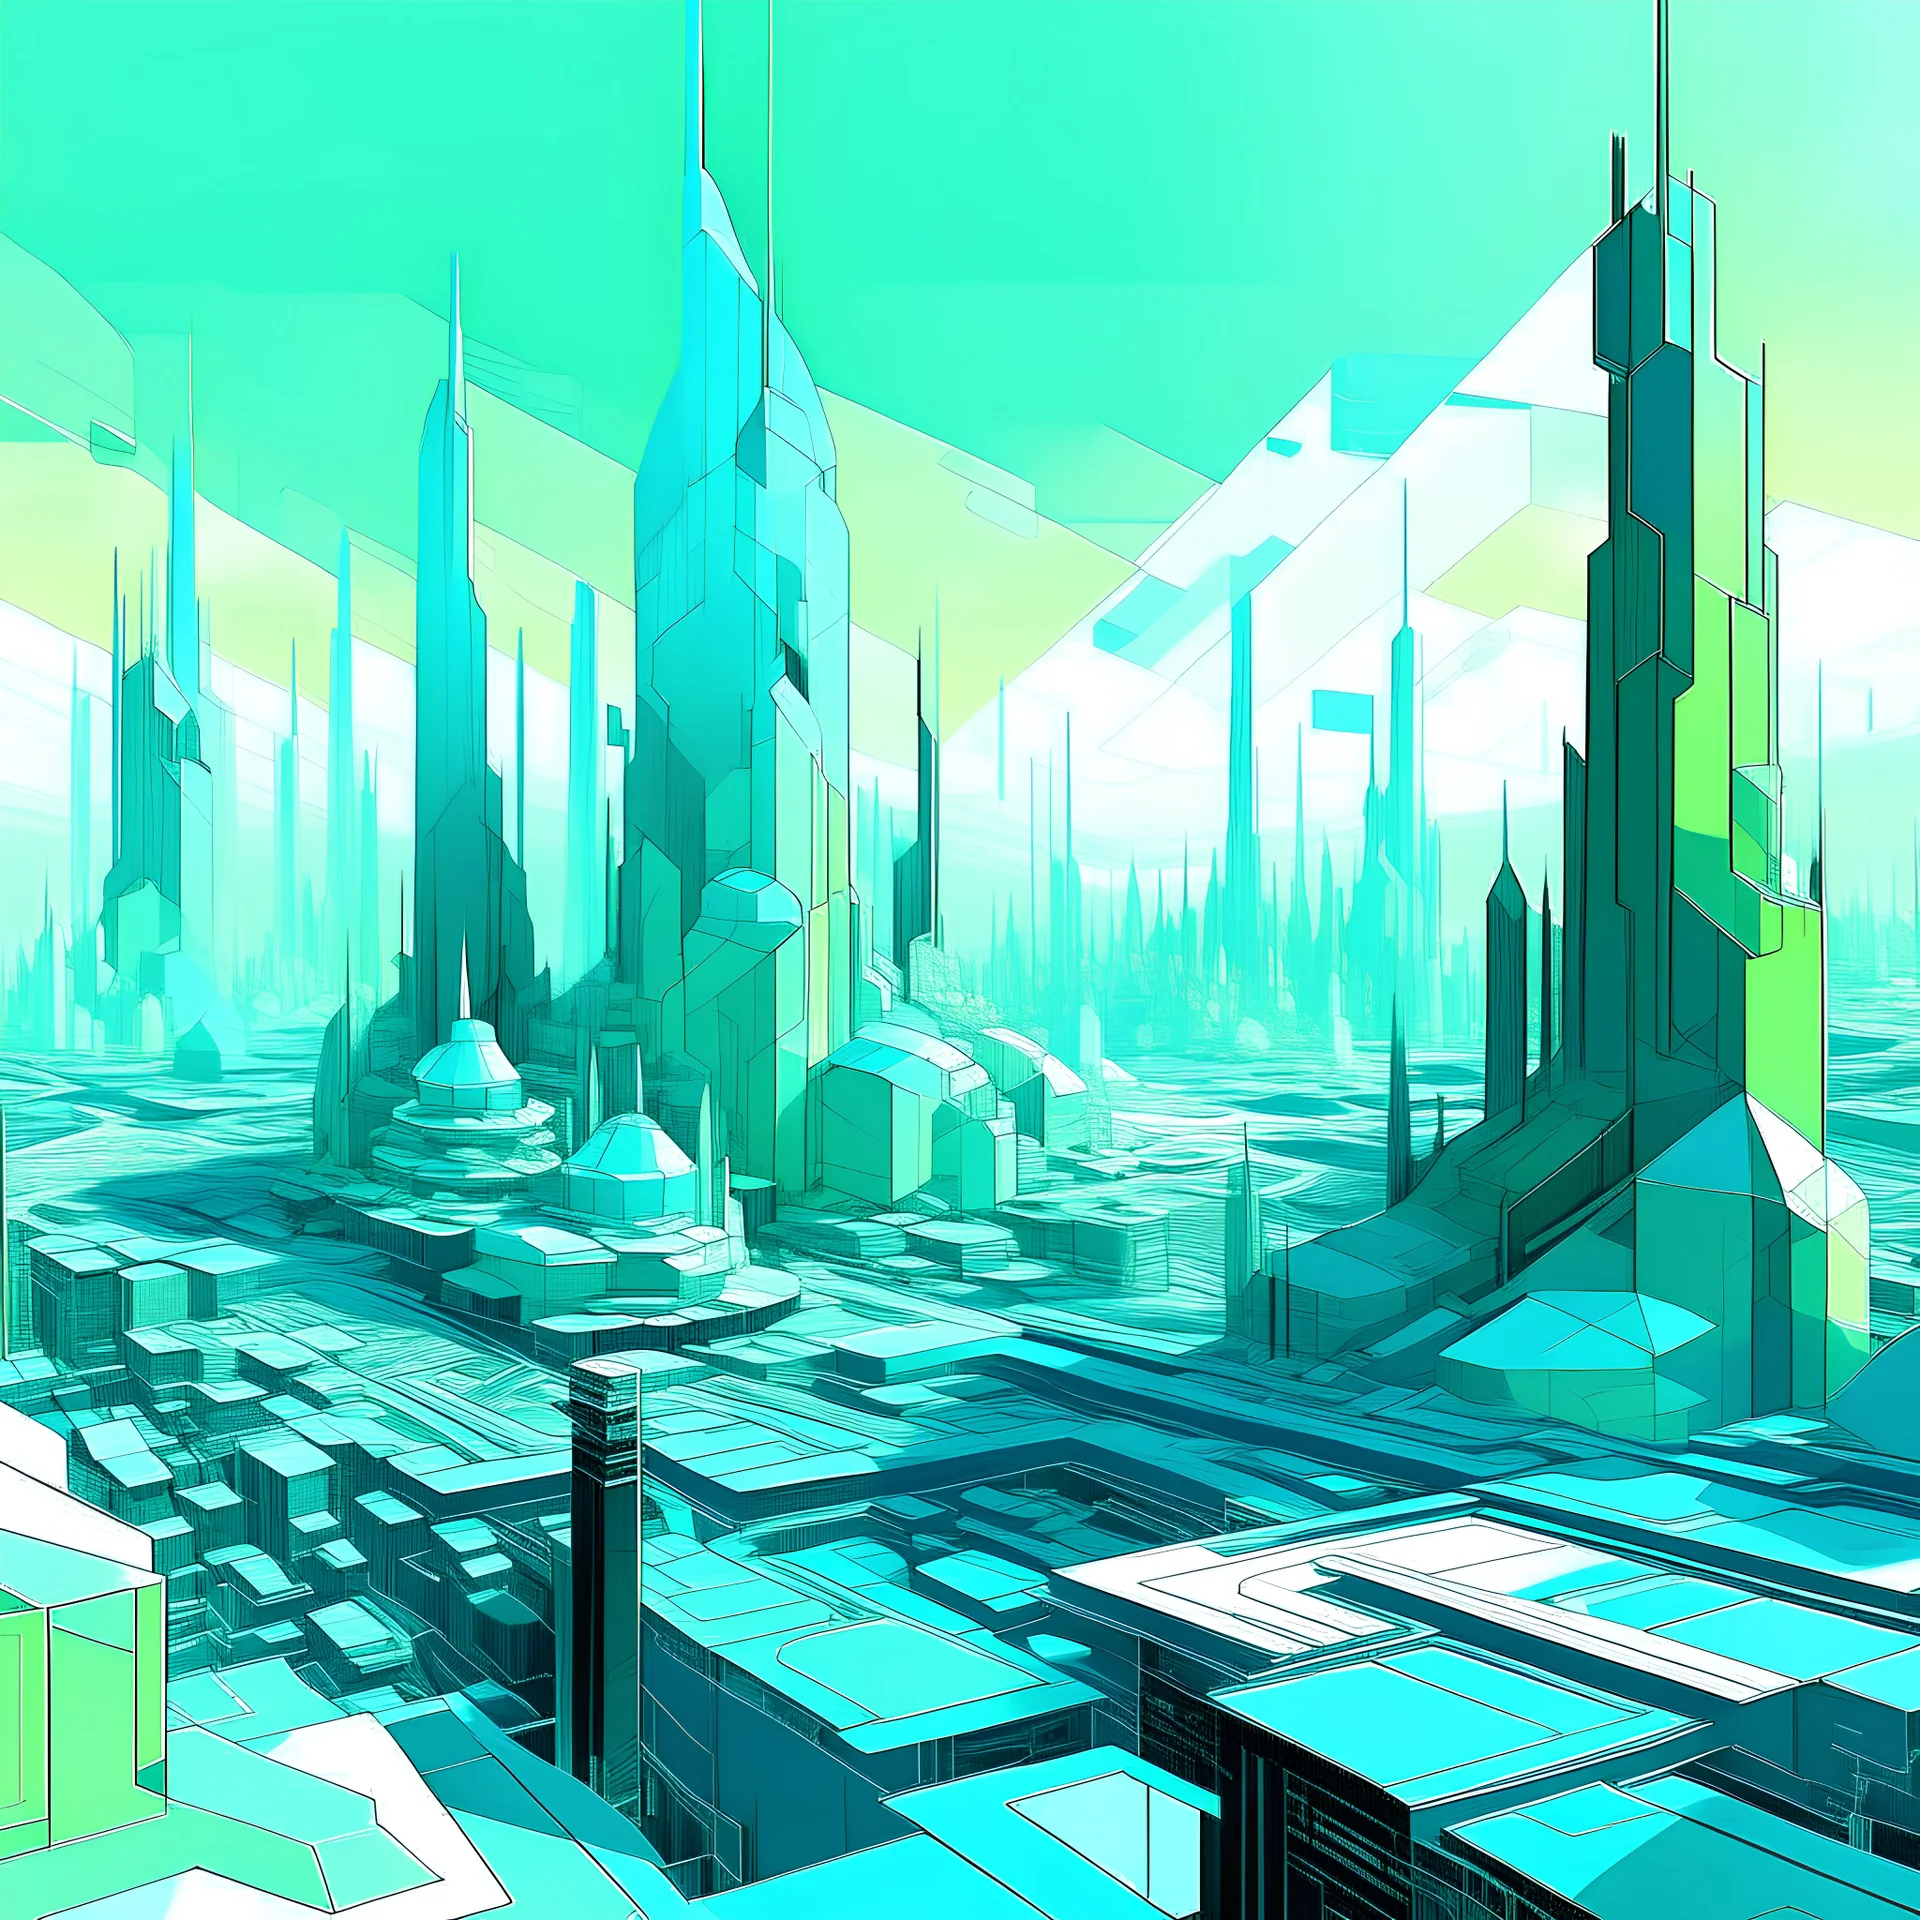 Digital illustration by Frank Miller of a futuristic and polygonal city, colors are 60% white, 20% light blue (#DBF0EC) and 20% light green (#CCE7D5).